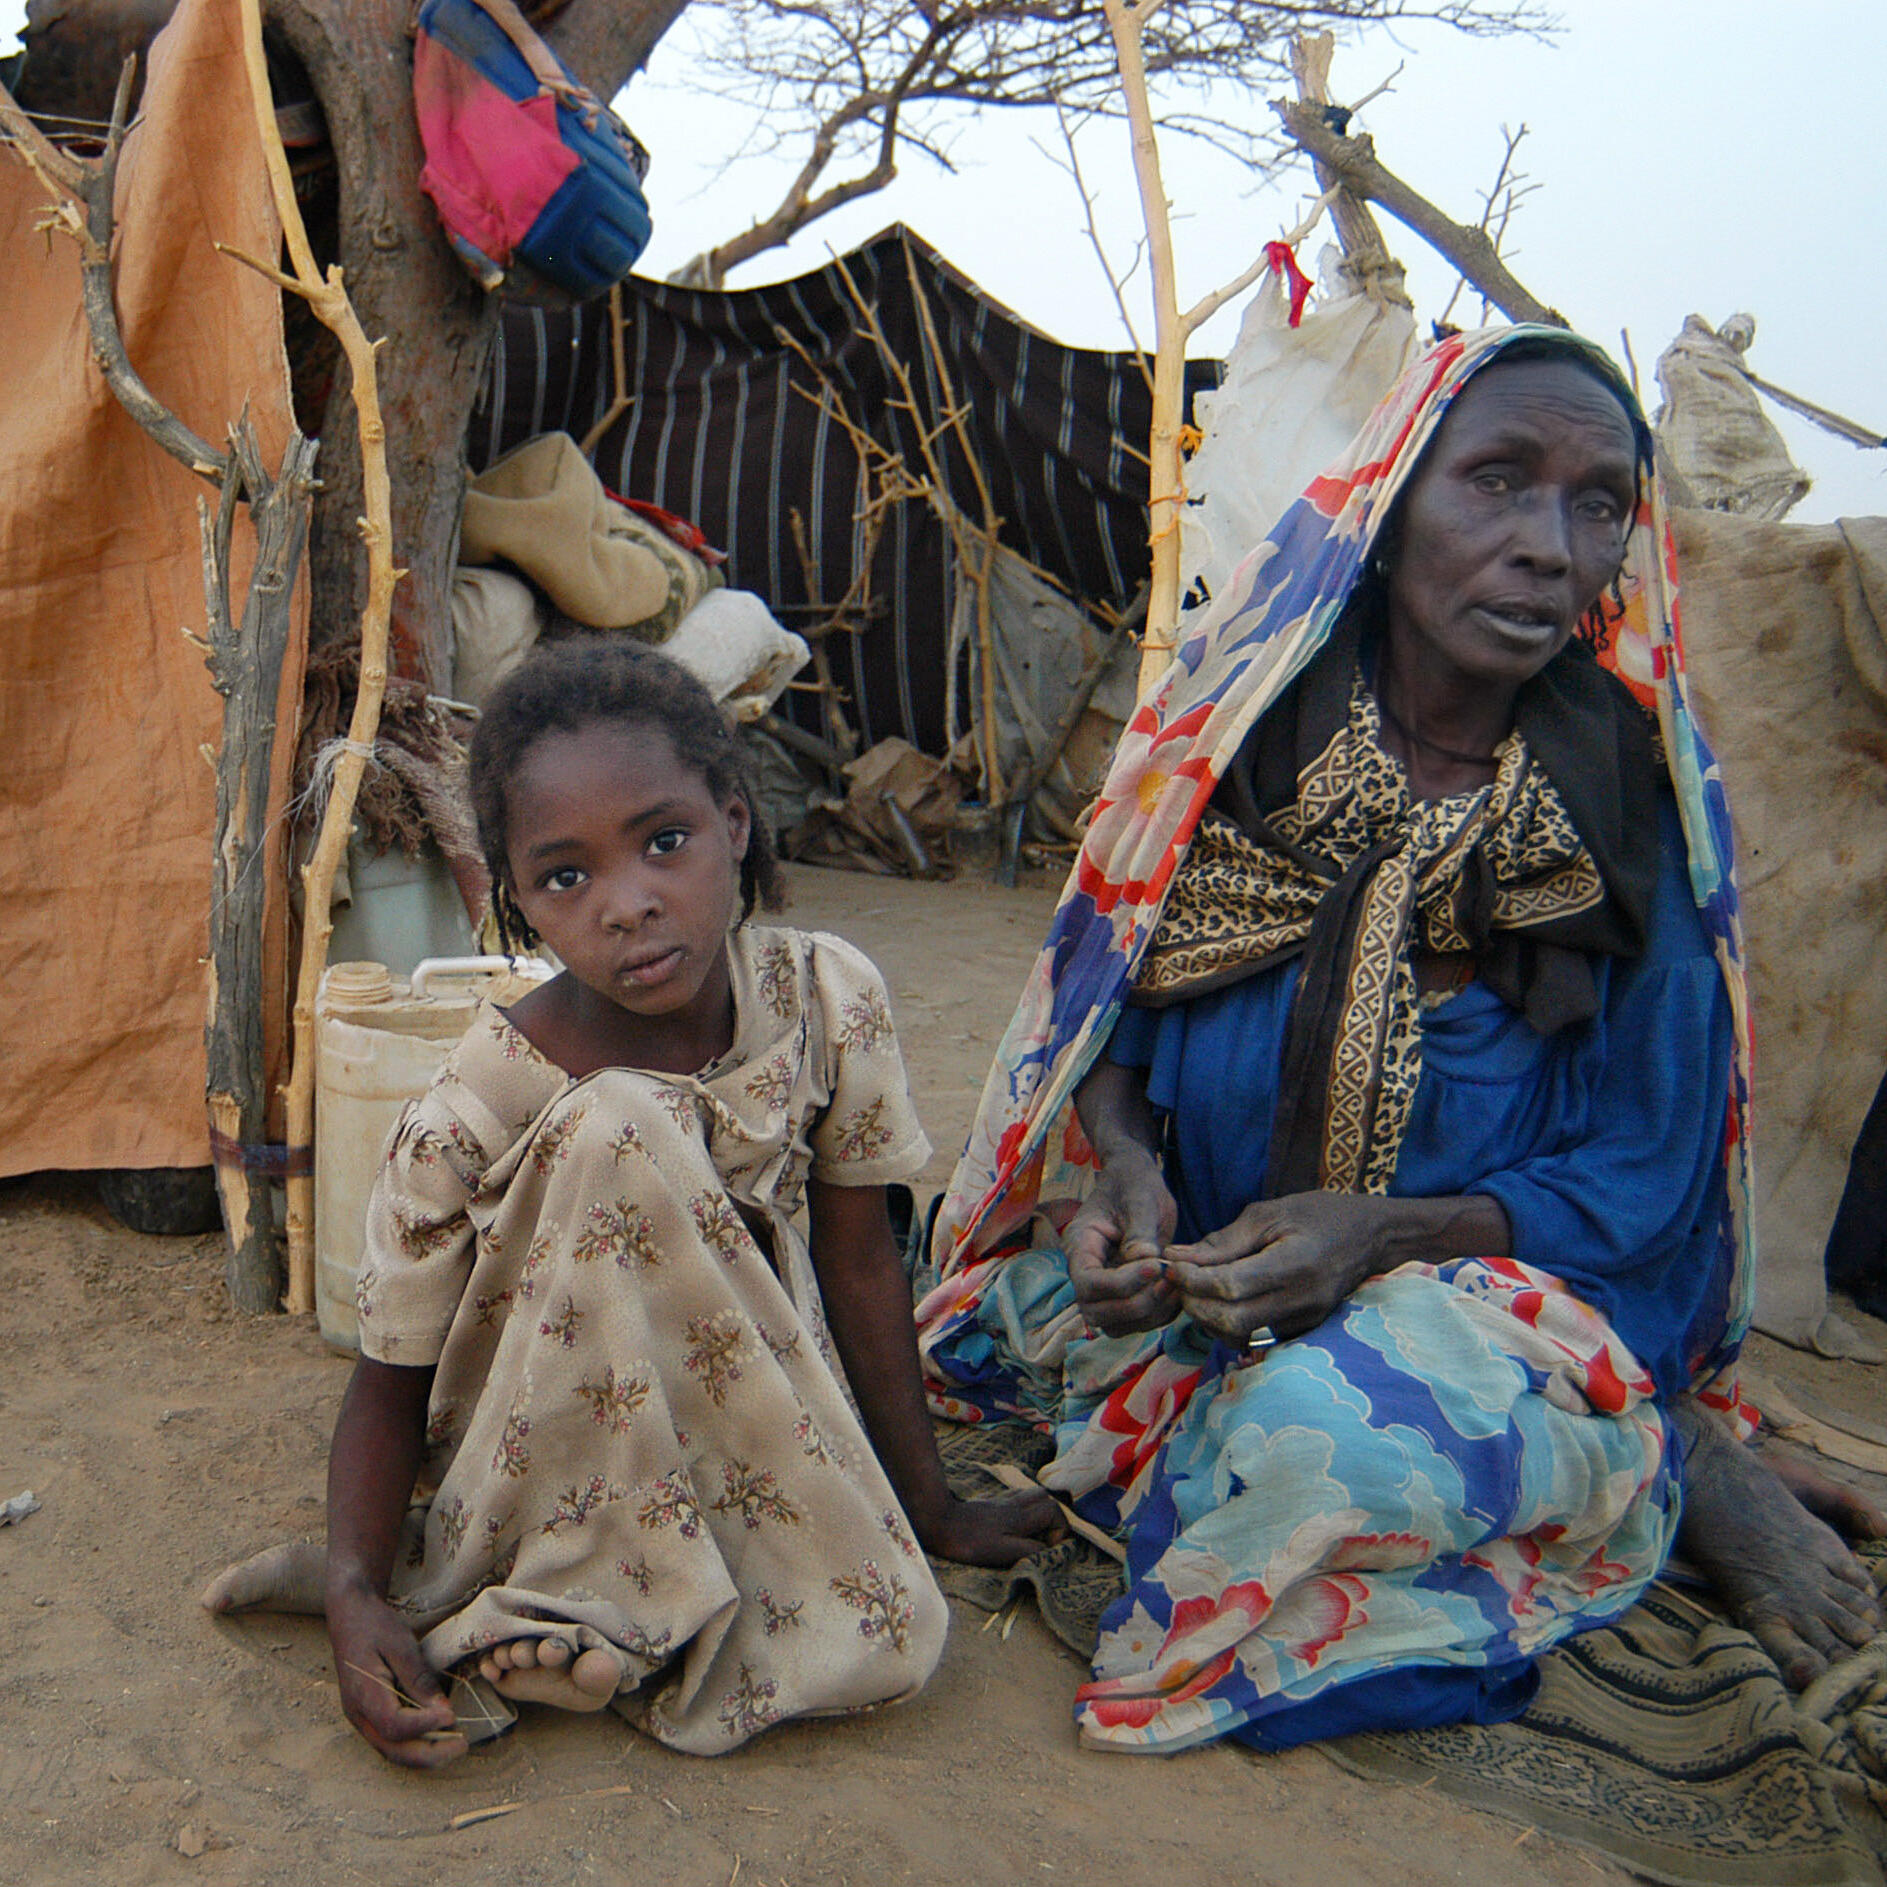 Sudanese refugee woman and girl sitting outside a shelter made of blankets and sheets.